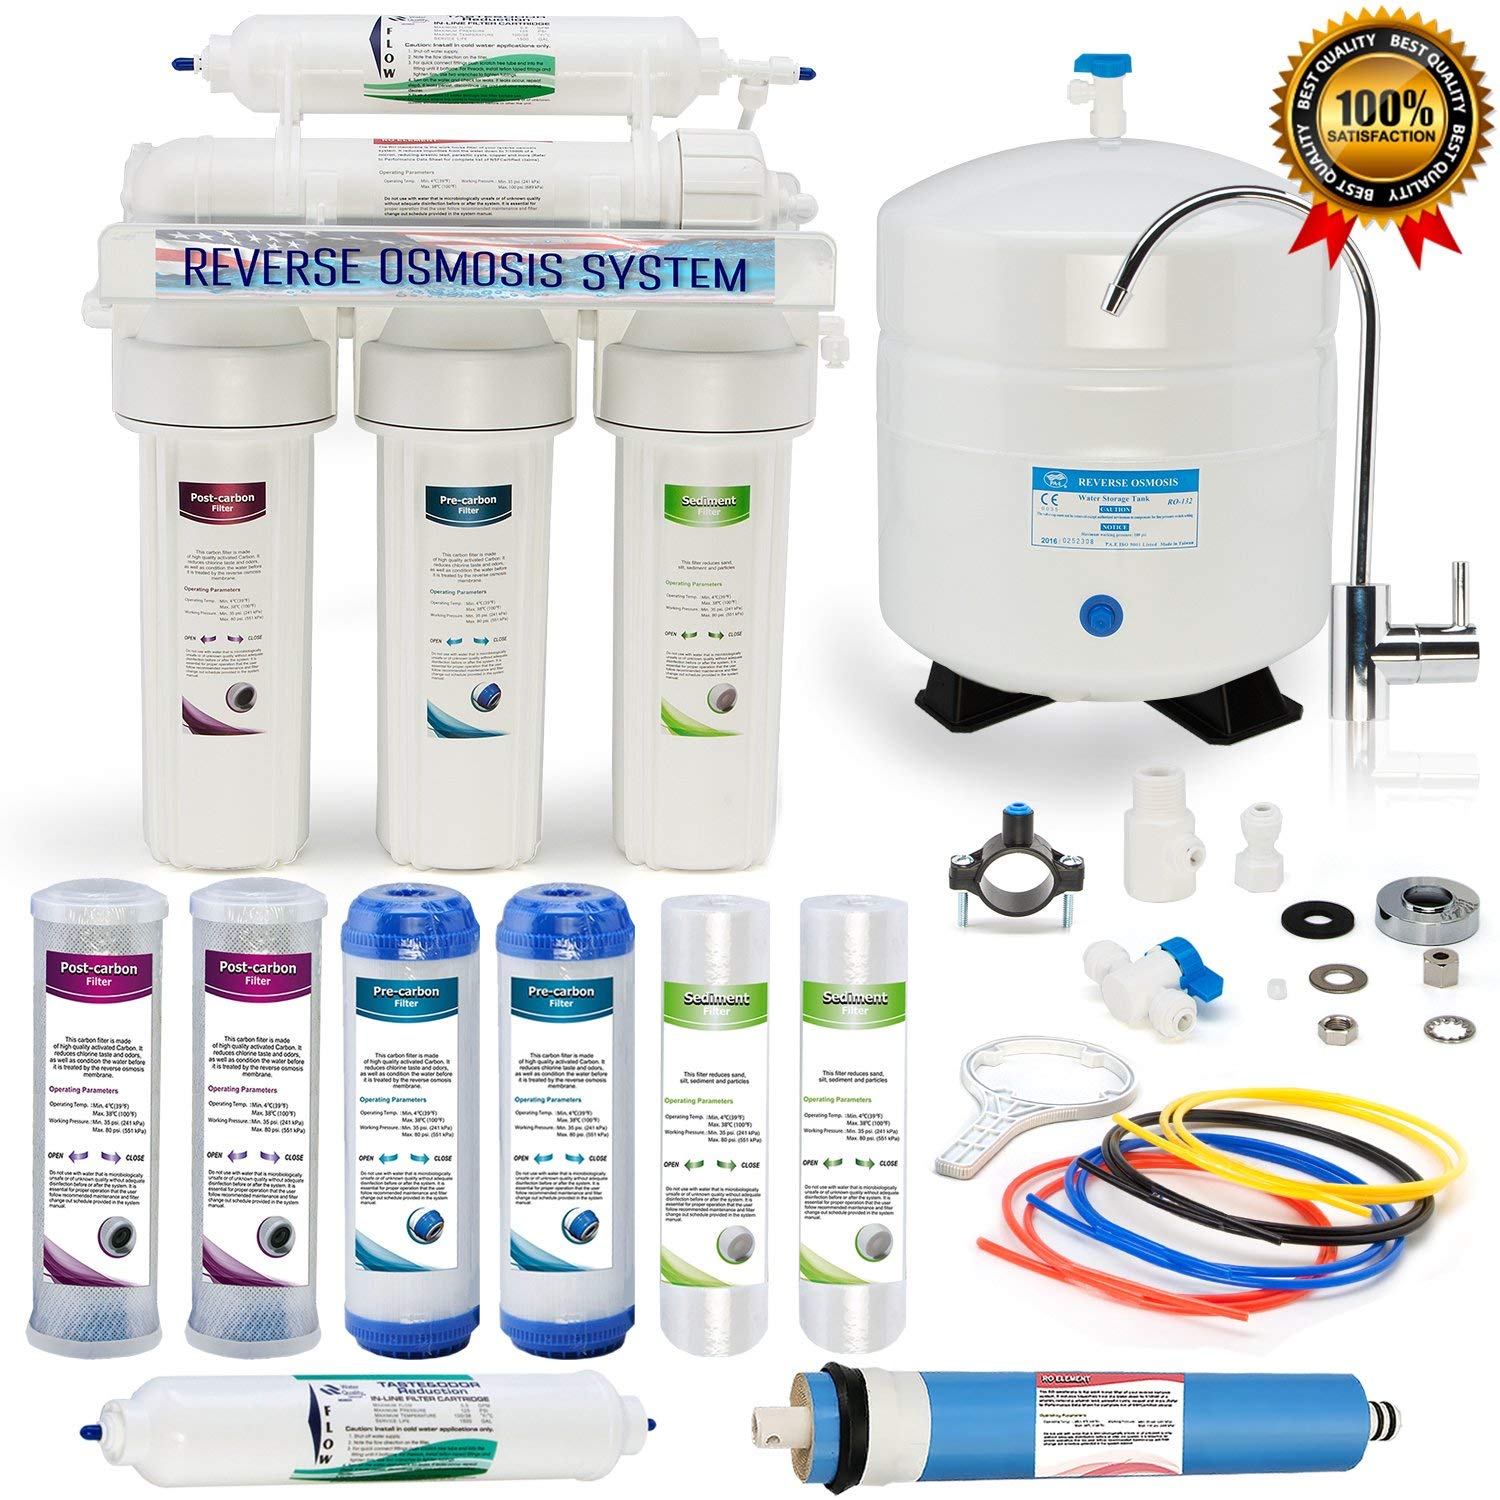 5 Best Reverse Osmosis systems for healthy drinking in 2019 Best Way To Clean System Of Alcohol